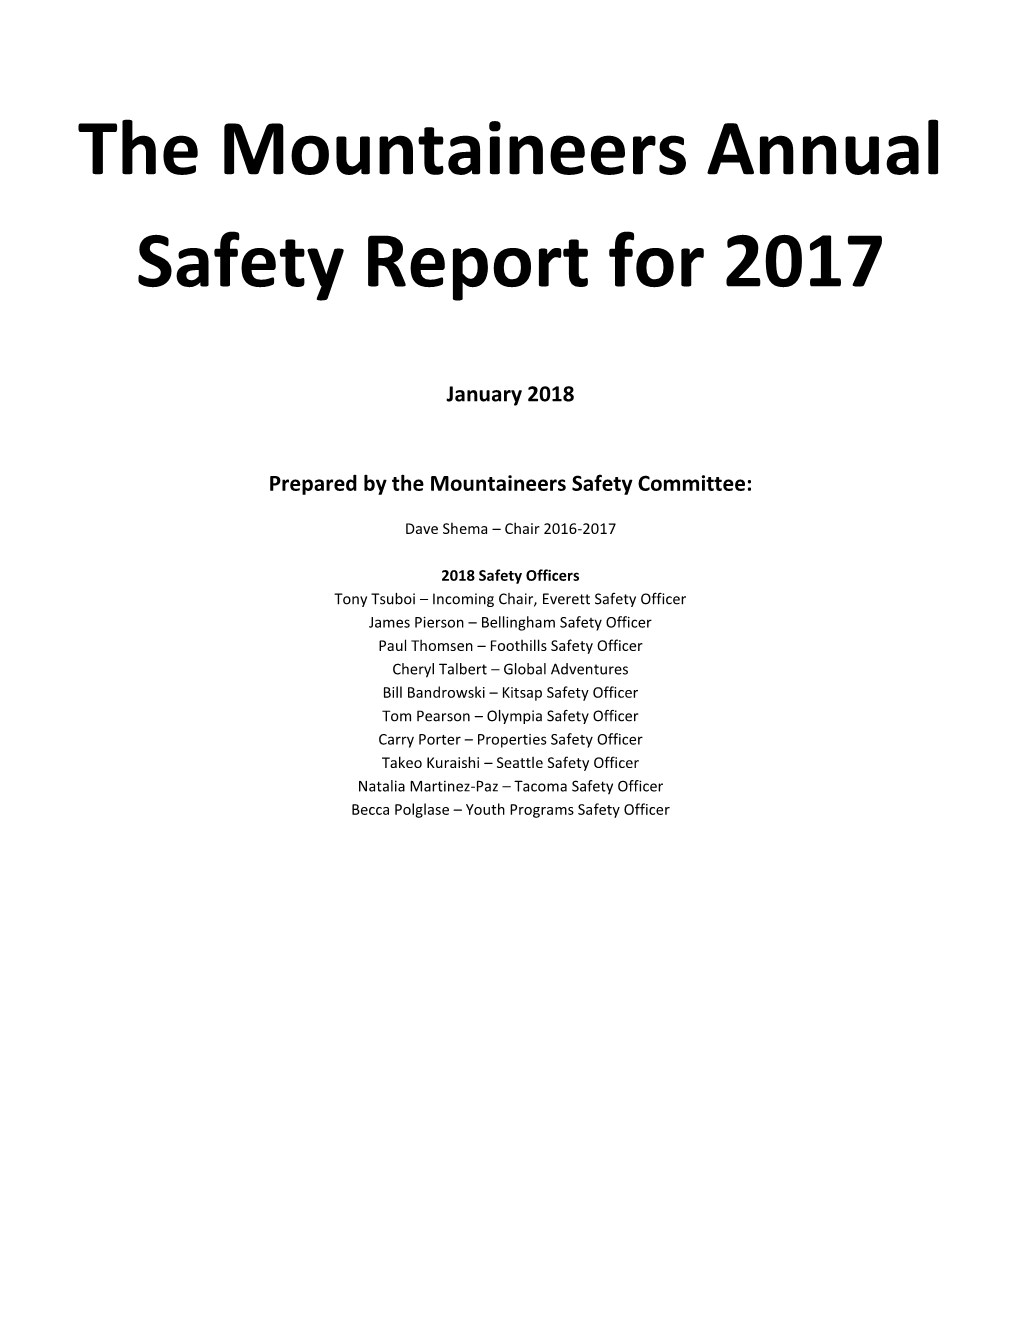 The Mountaineers Annual Safety Report for 2017